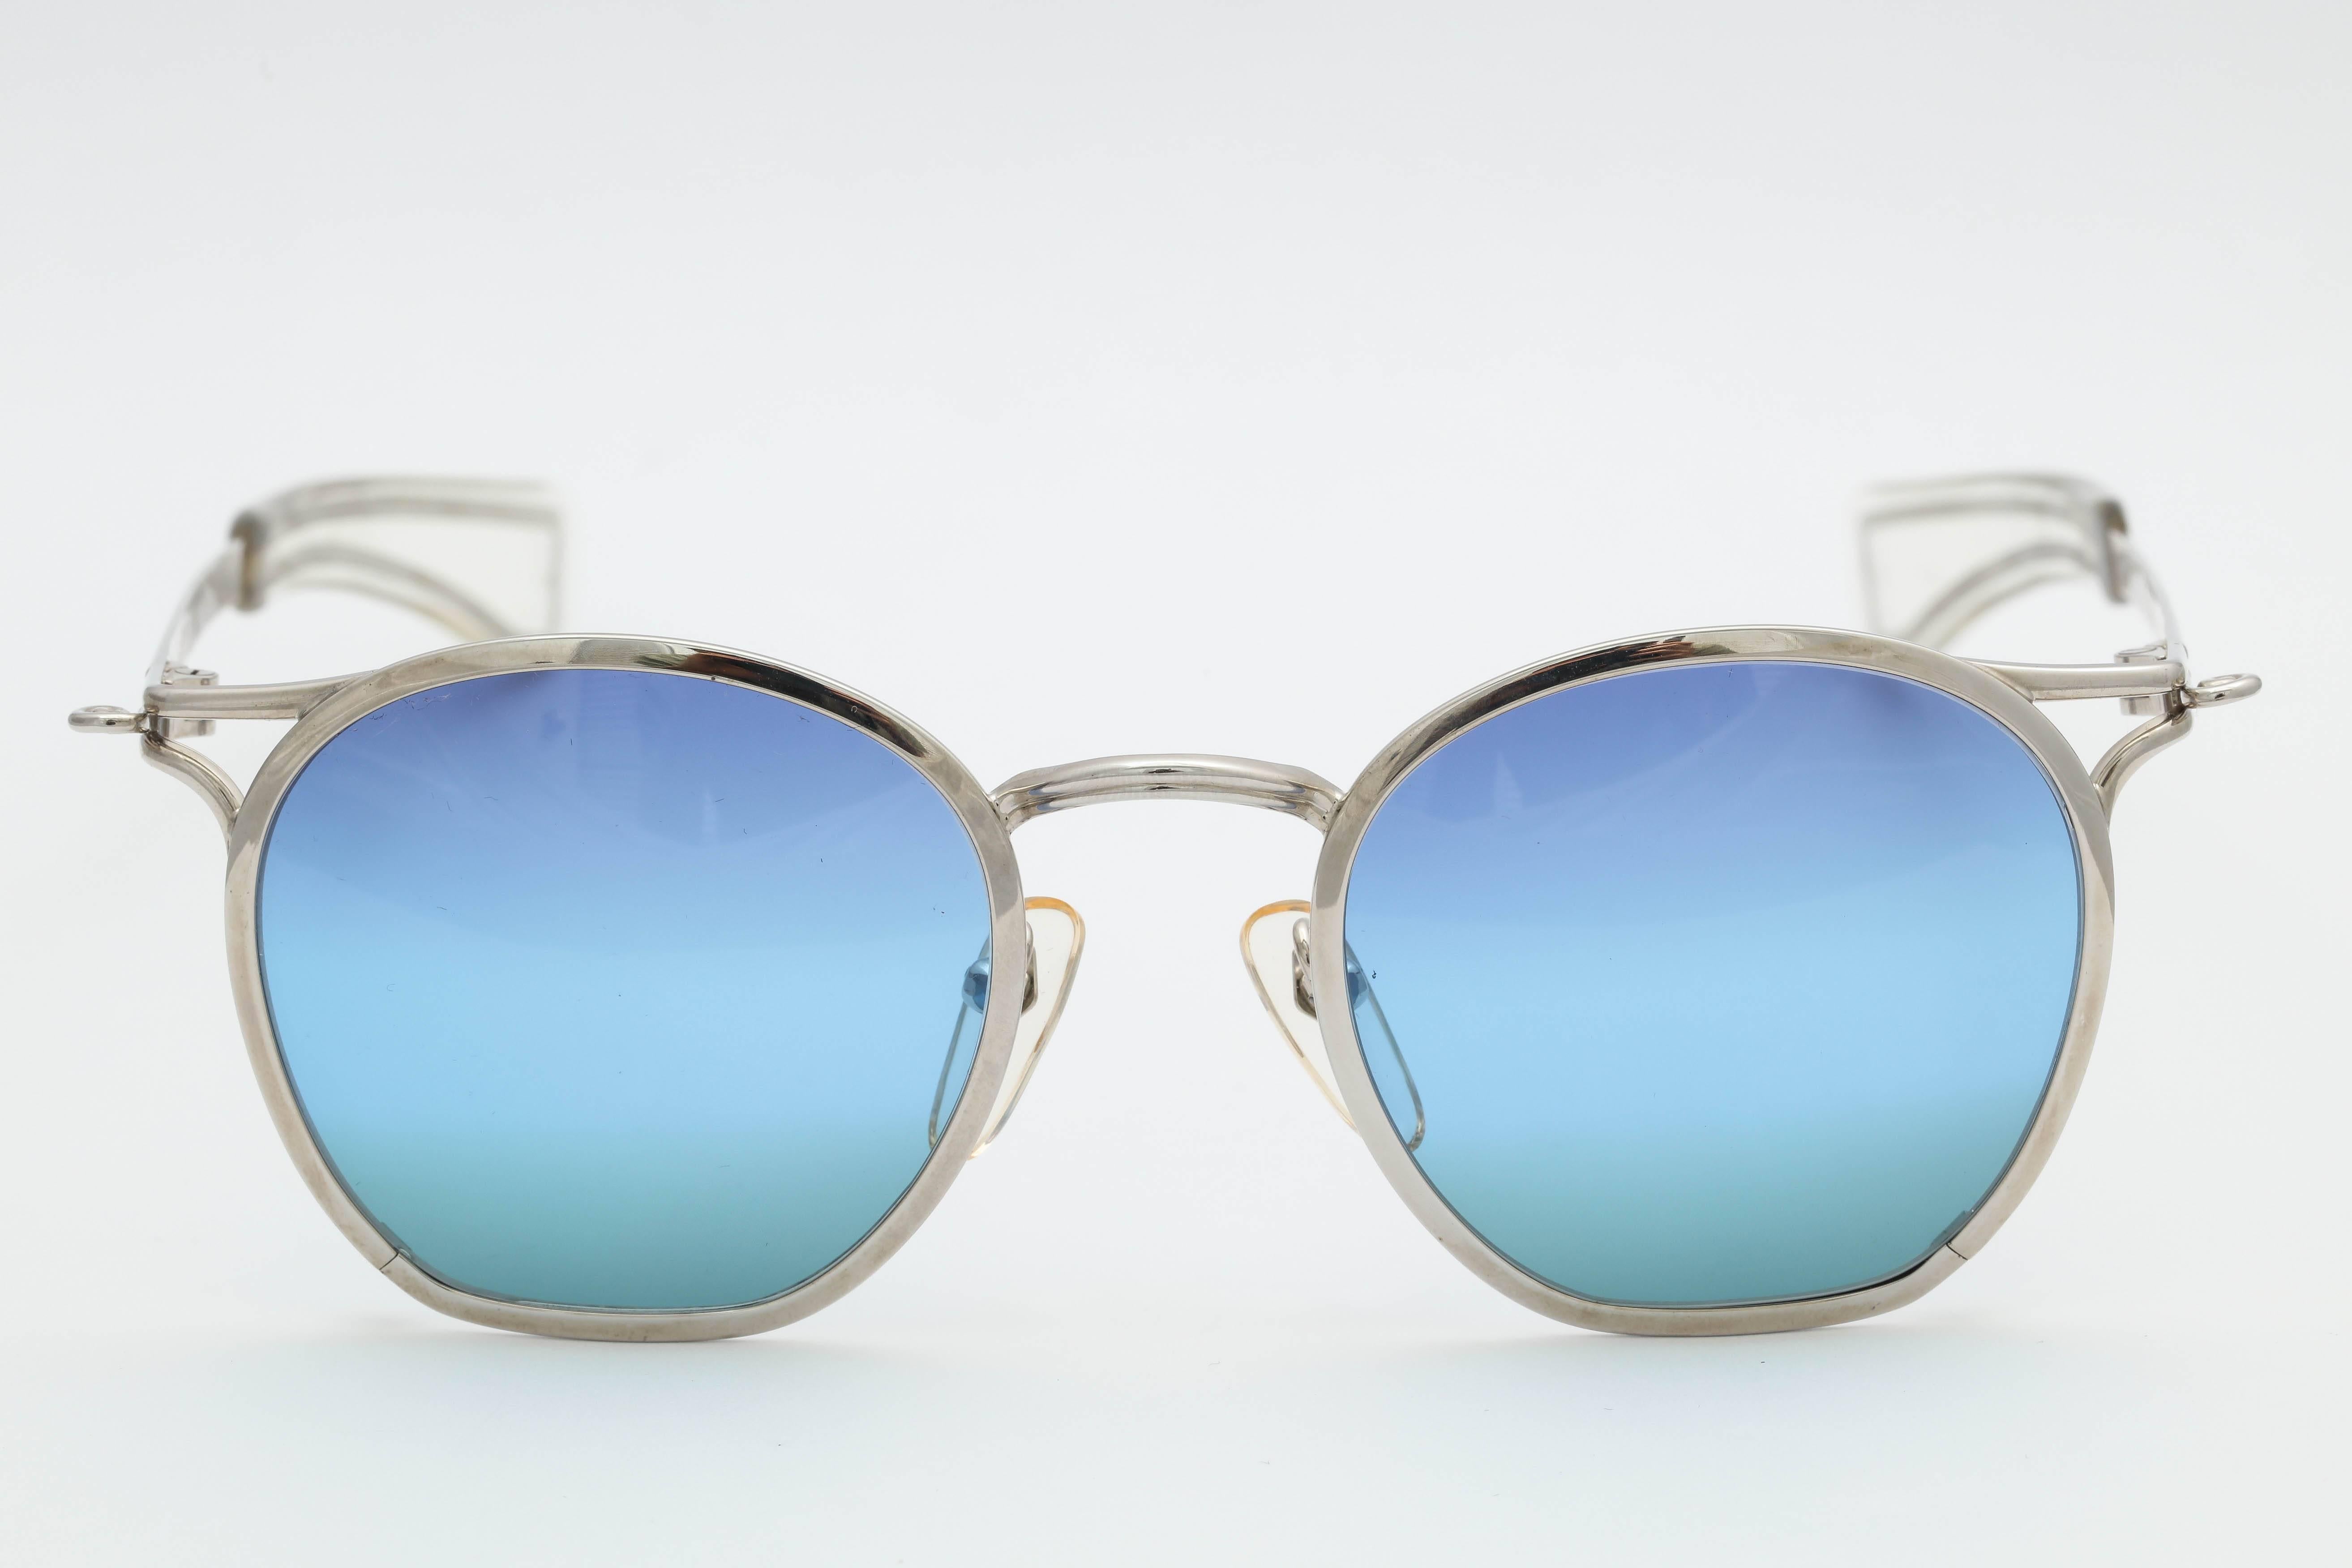 Vintage Jean Paul Gaultier Sunglasses 56-0105 In Excellent Condition For Sale In Chicago, IL